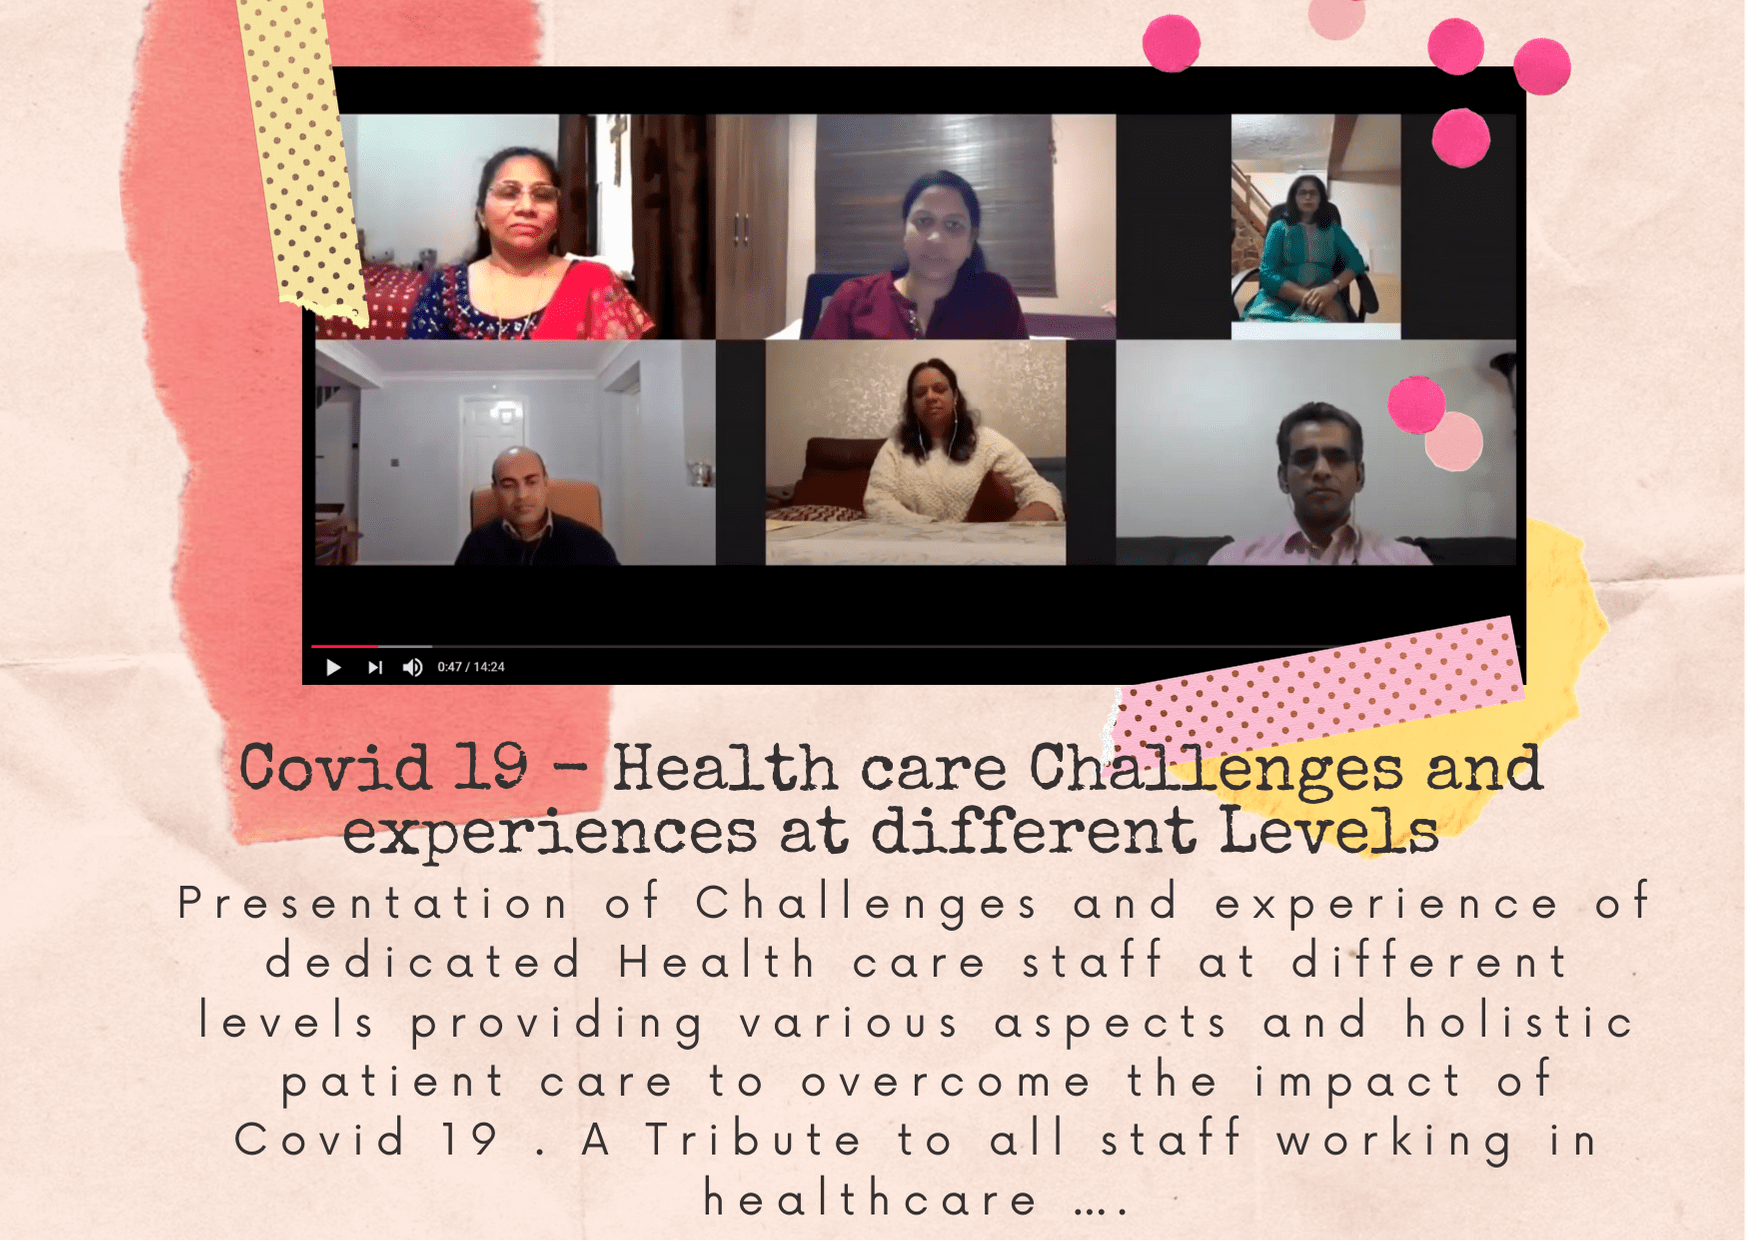 Episode 1: Covid 19 – Health care Challenges and experiences at different Levels…